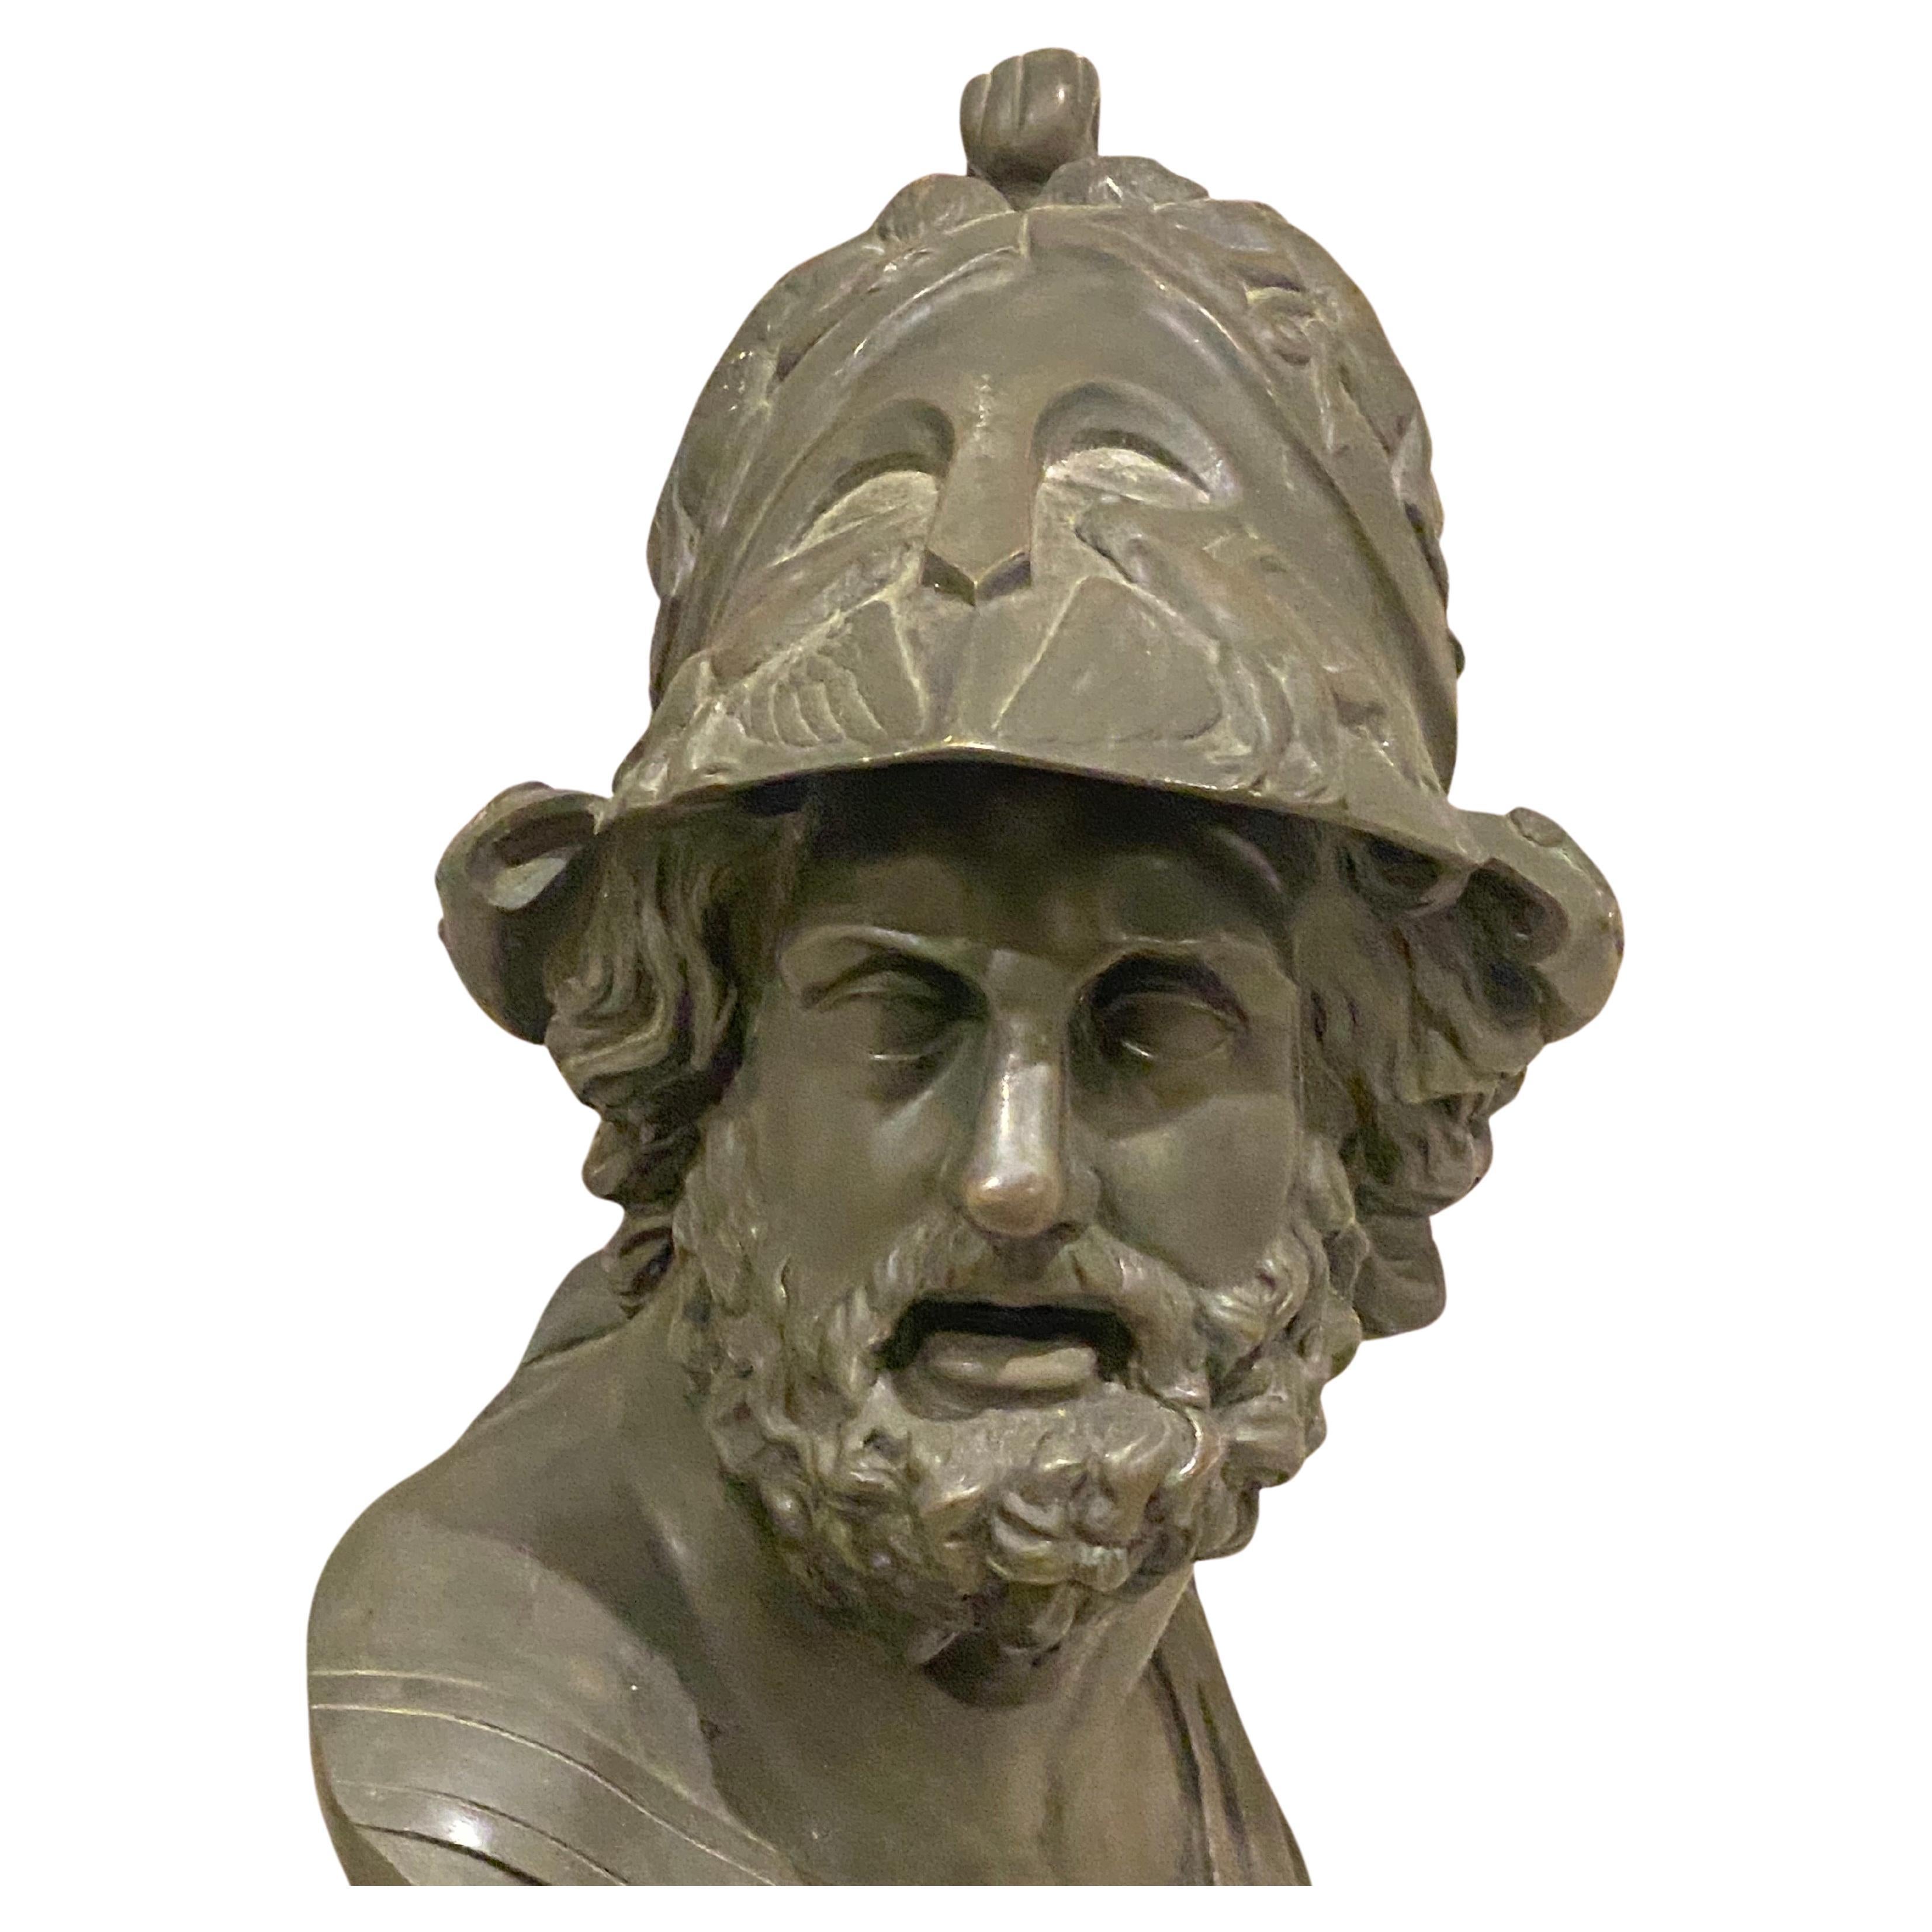 19th Century bronze bust Menelaus mythological king of Sparta. A fine casting with rich patina. In Greek mythology, Menelaus (Greek: Menelaos, from 